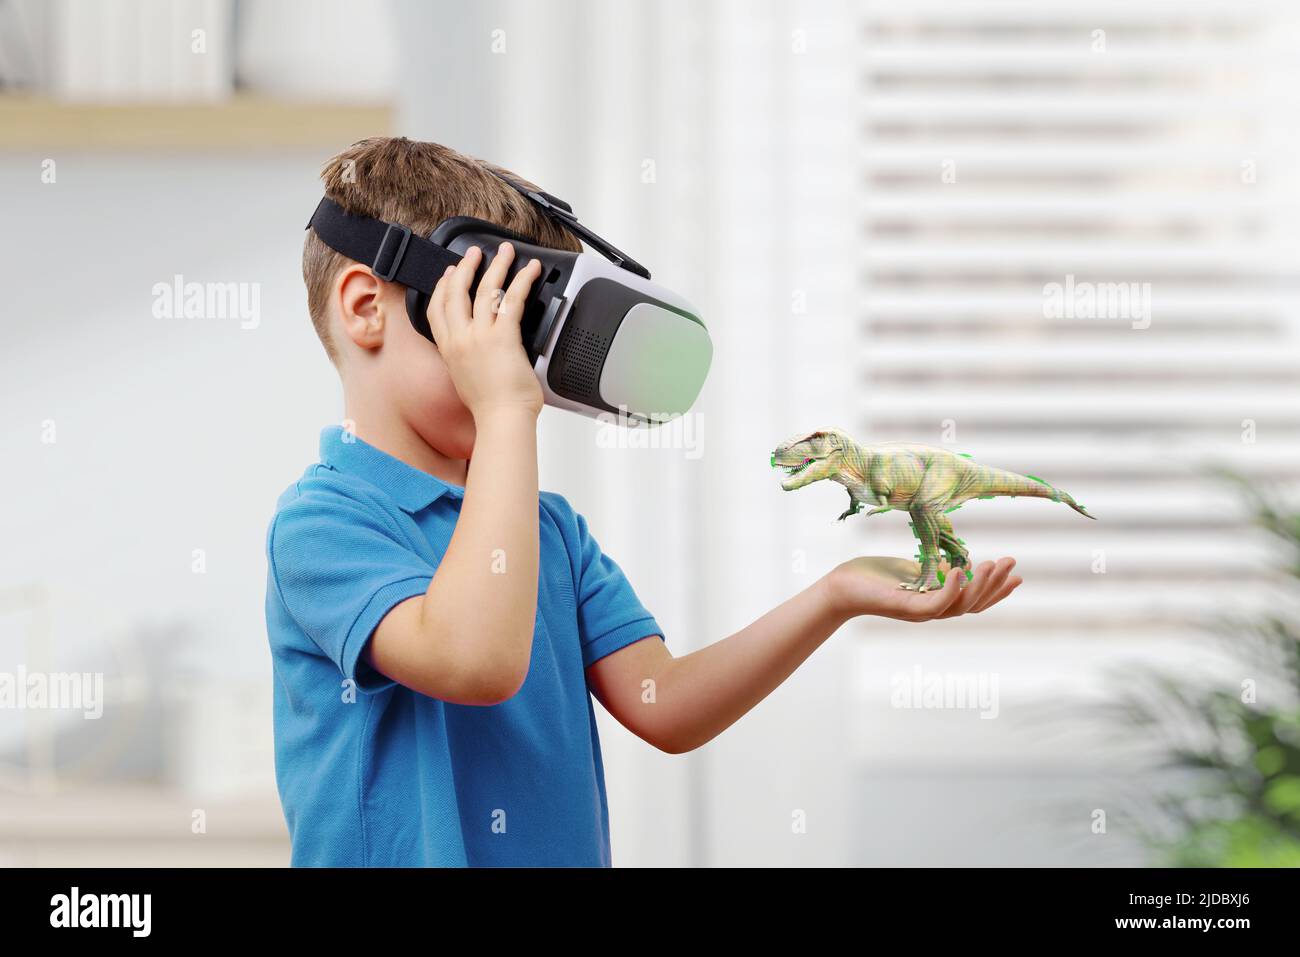 Boy with VR glasses projects a dinosaur on his arm. The concept of using virtual reality in education Stock Photo